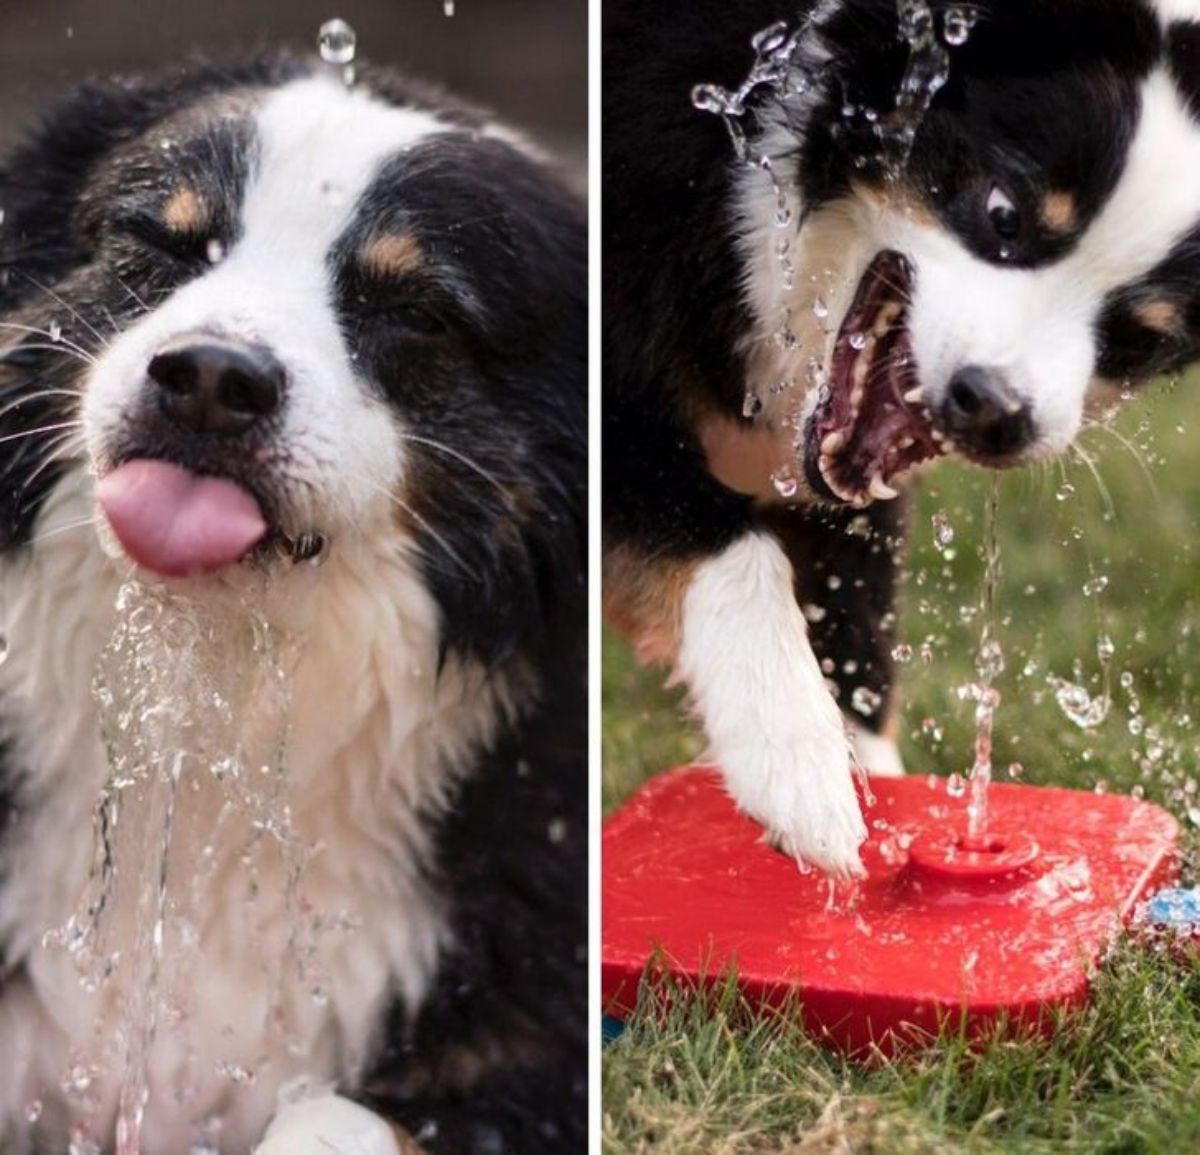 2 photos of a bernese mountain dog playing with water